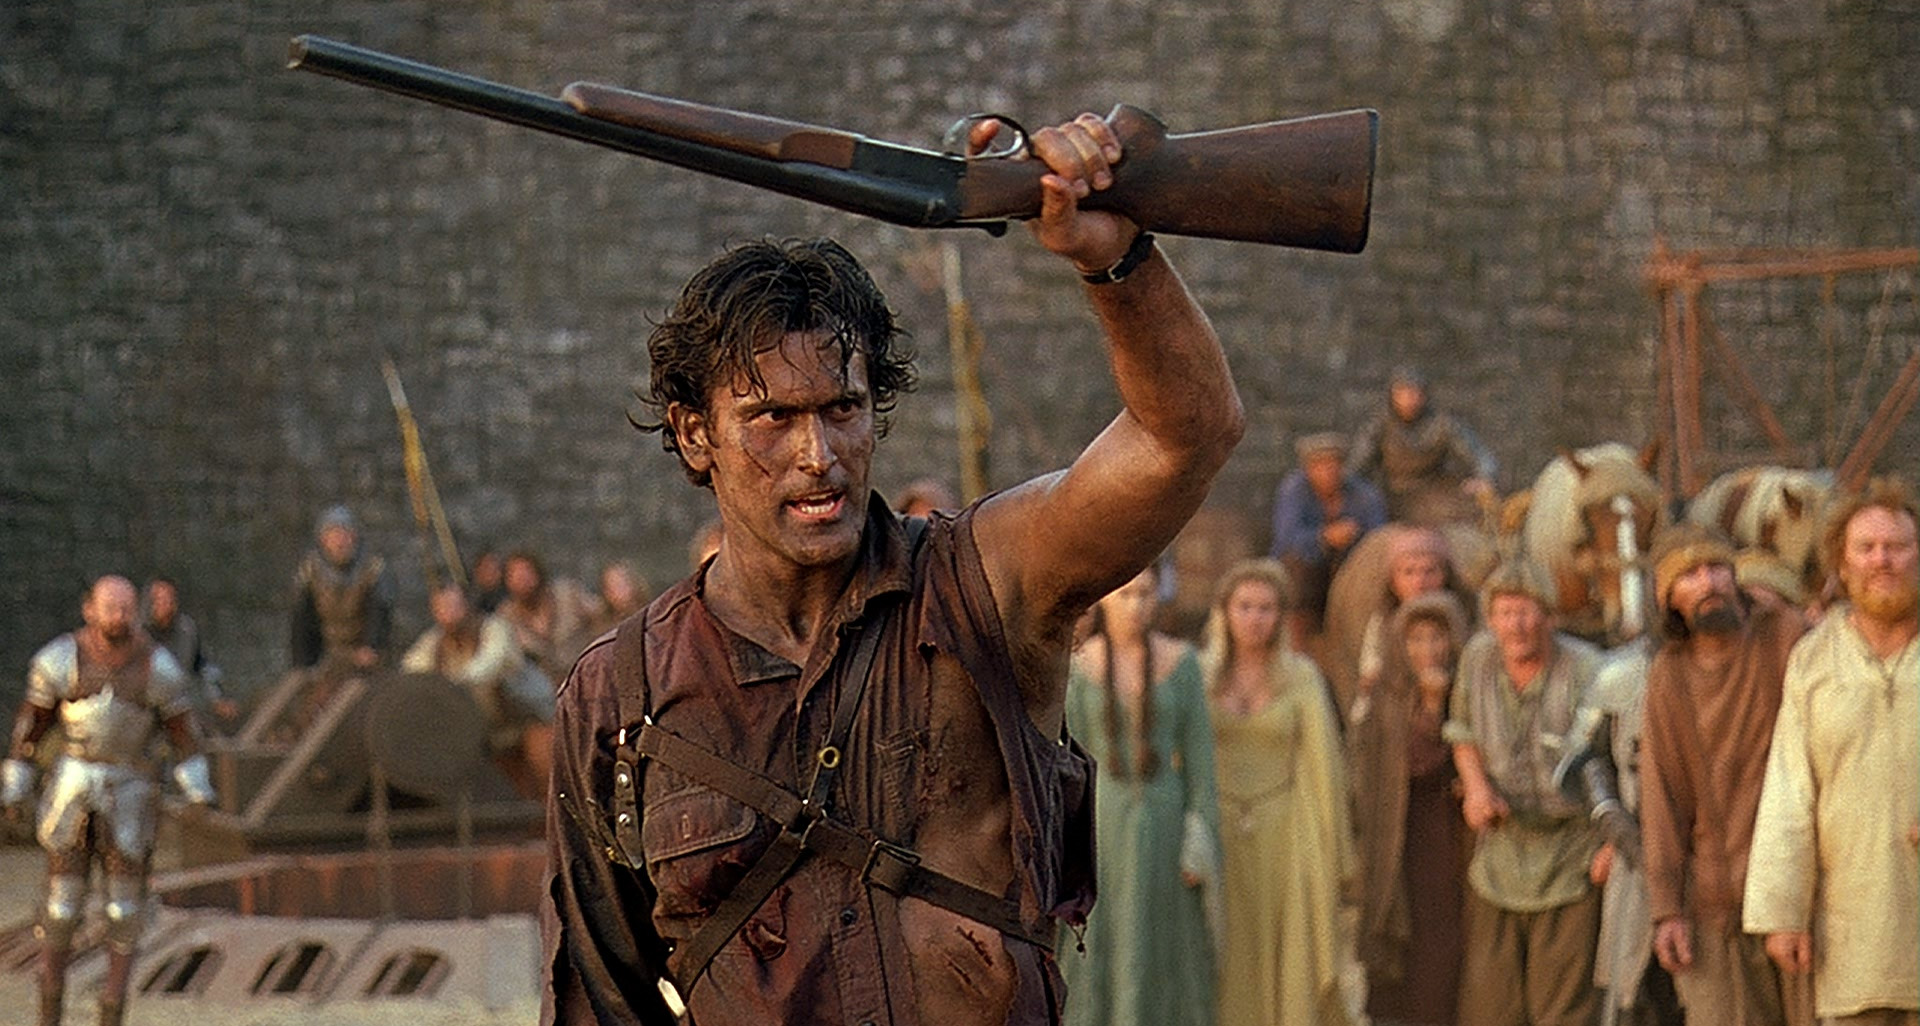 The Boomstick, Army Of Darkness.